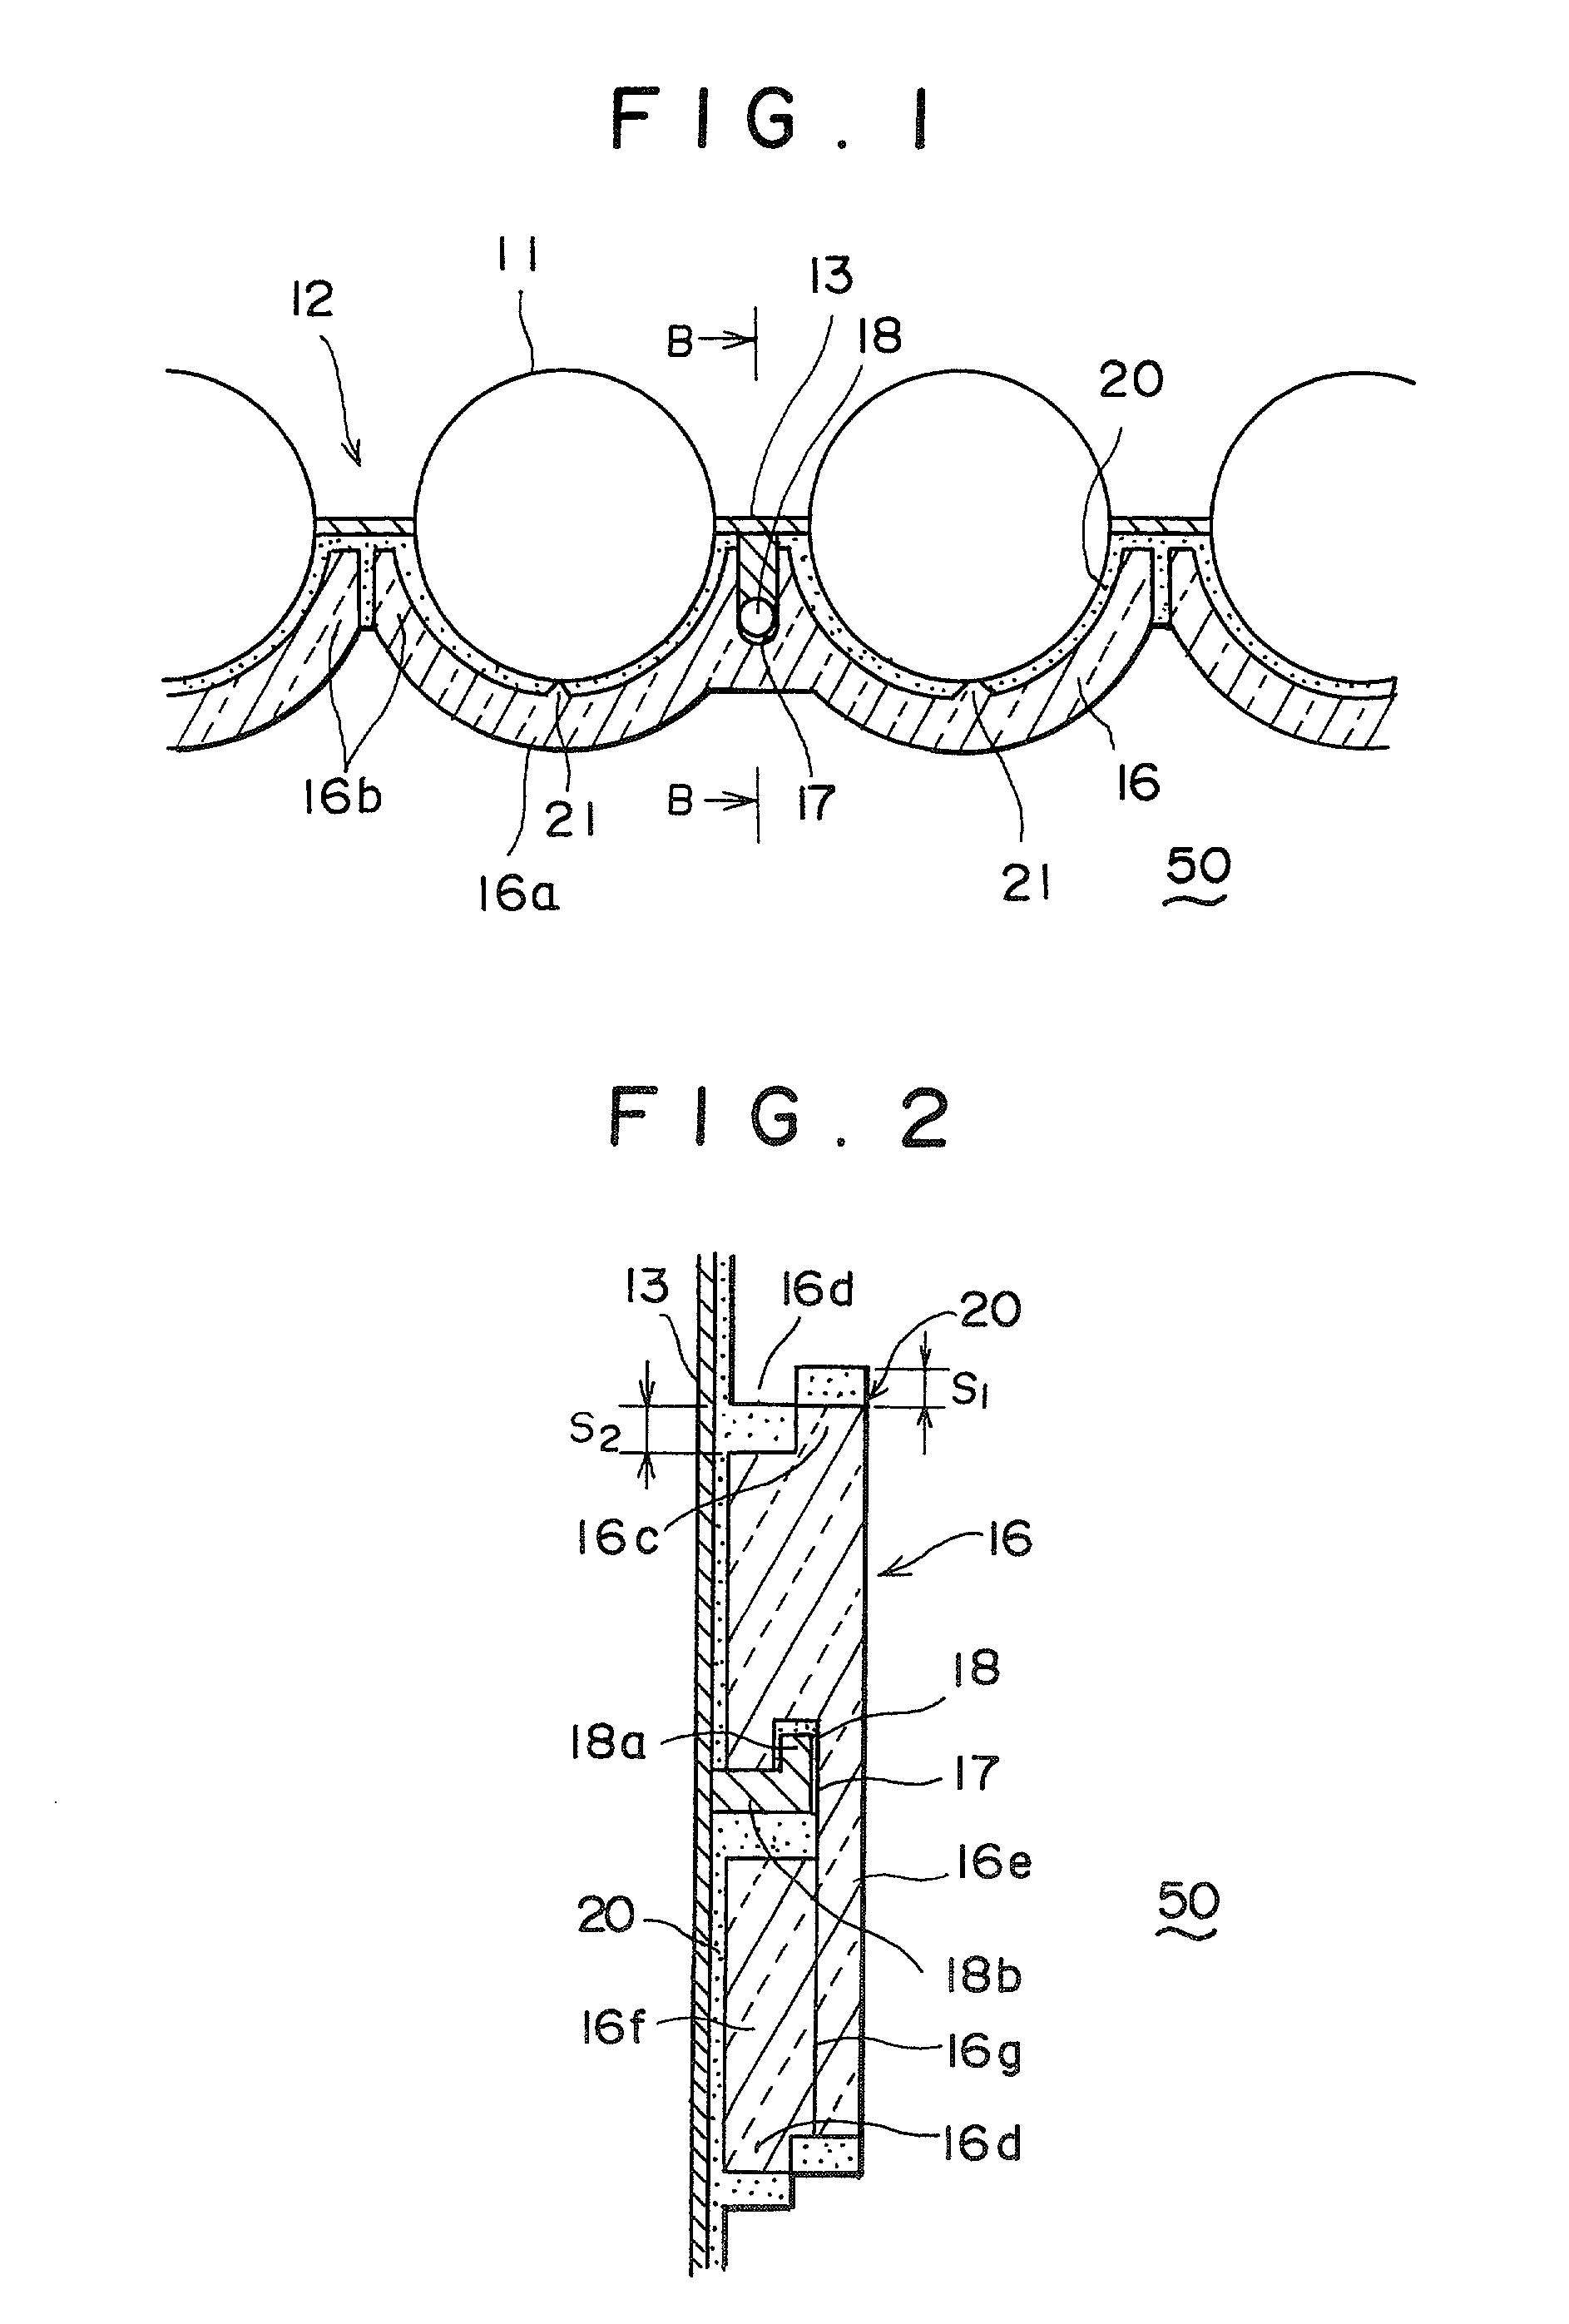 Heat-resistant assembly for protecting boiler tubes and method of assembling same